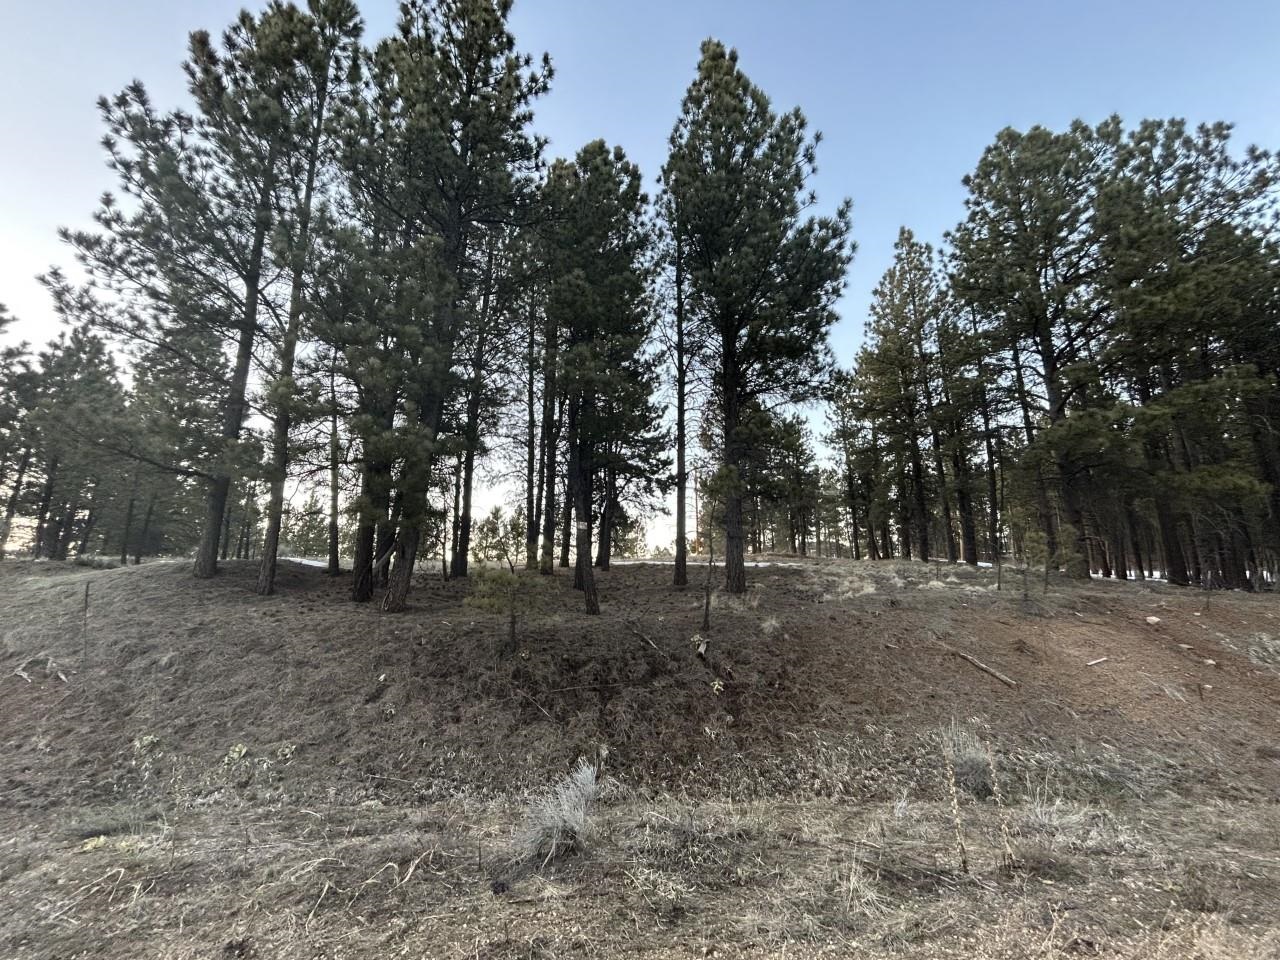 Beautiful lot with views of the ski mountain and Wheelers Peak. Gently sloped makes for a easy build. Located in the center of town right next to the Angel Fire Resort ski-mountain, and just minutes from other resort amenities including the PGA rated golf course, hiking trails, trout-stocked lake, country club, gym, tennis/pickleball courts and a nationally recognized mountain bike terrain park.